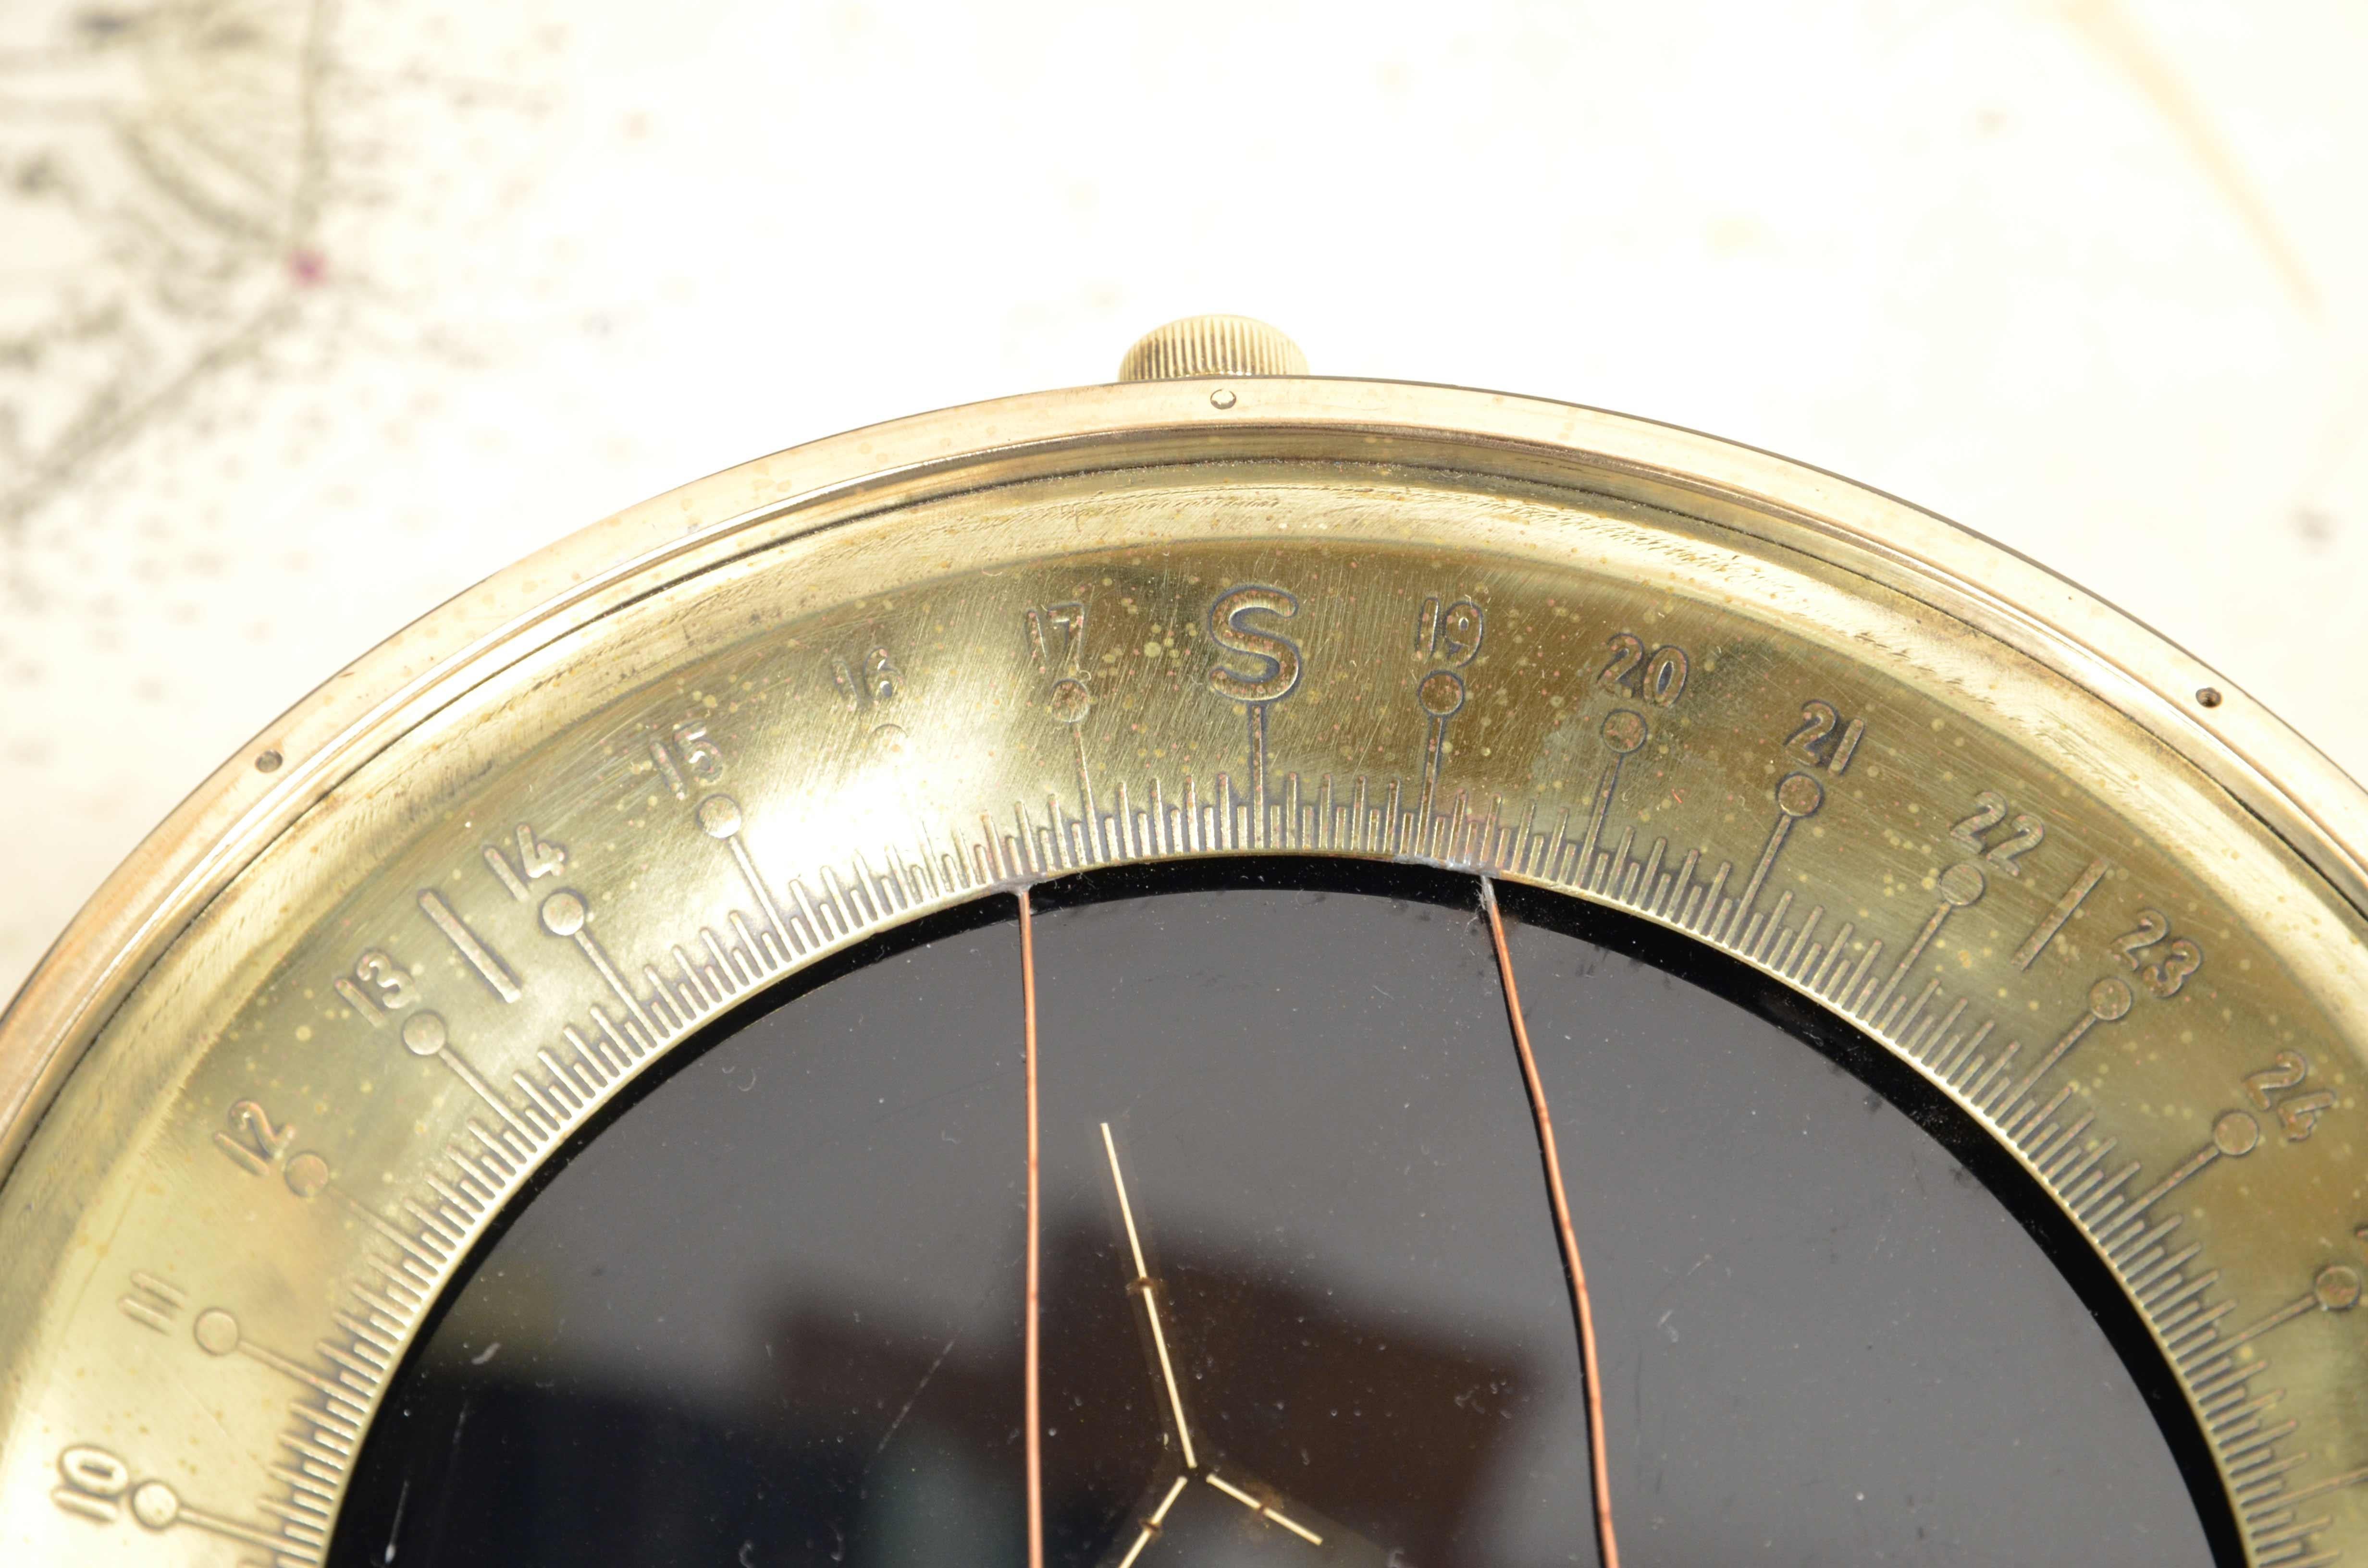 Mid-20th Century Brass and aluminum aviation compass complete with azimuth circle 1940 U.S.A For Sale